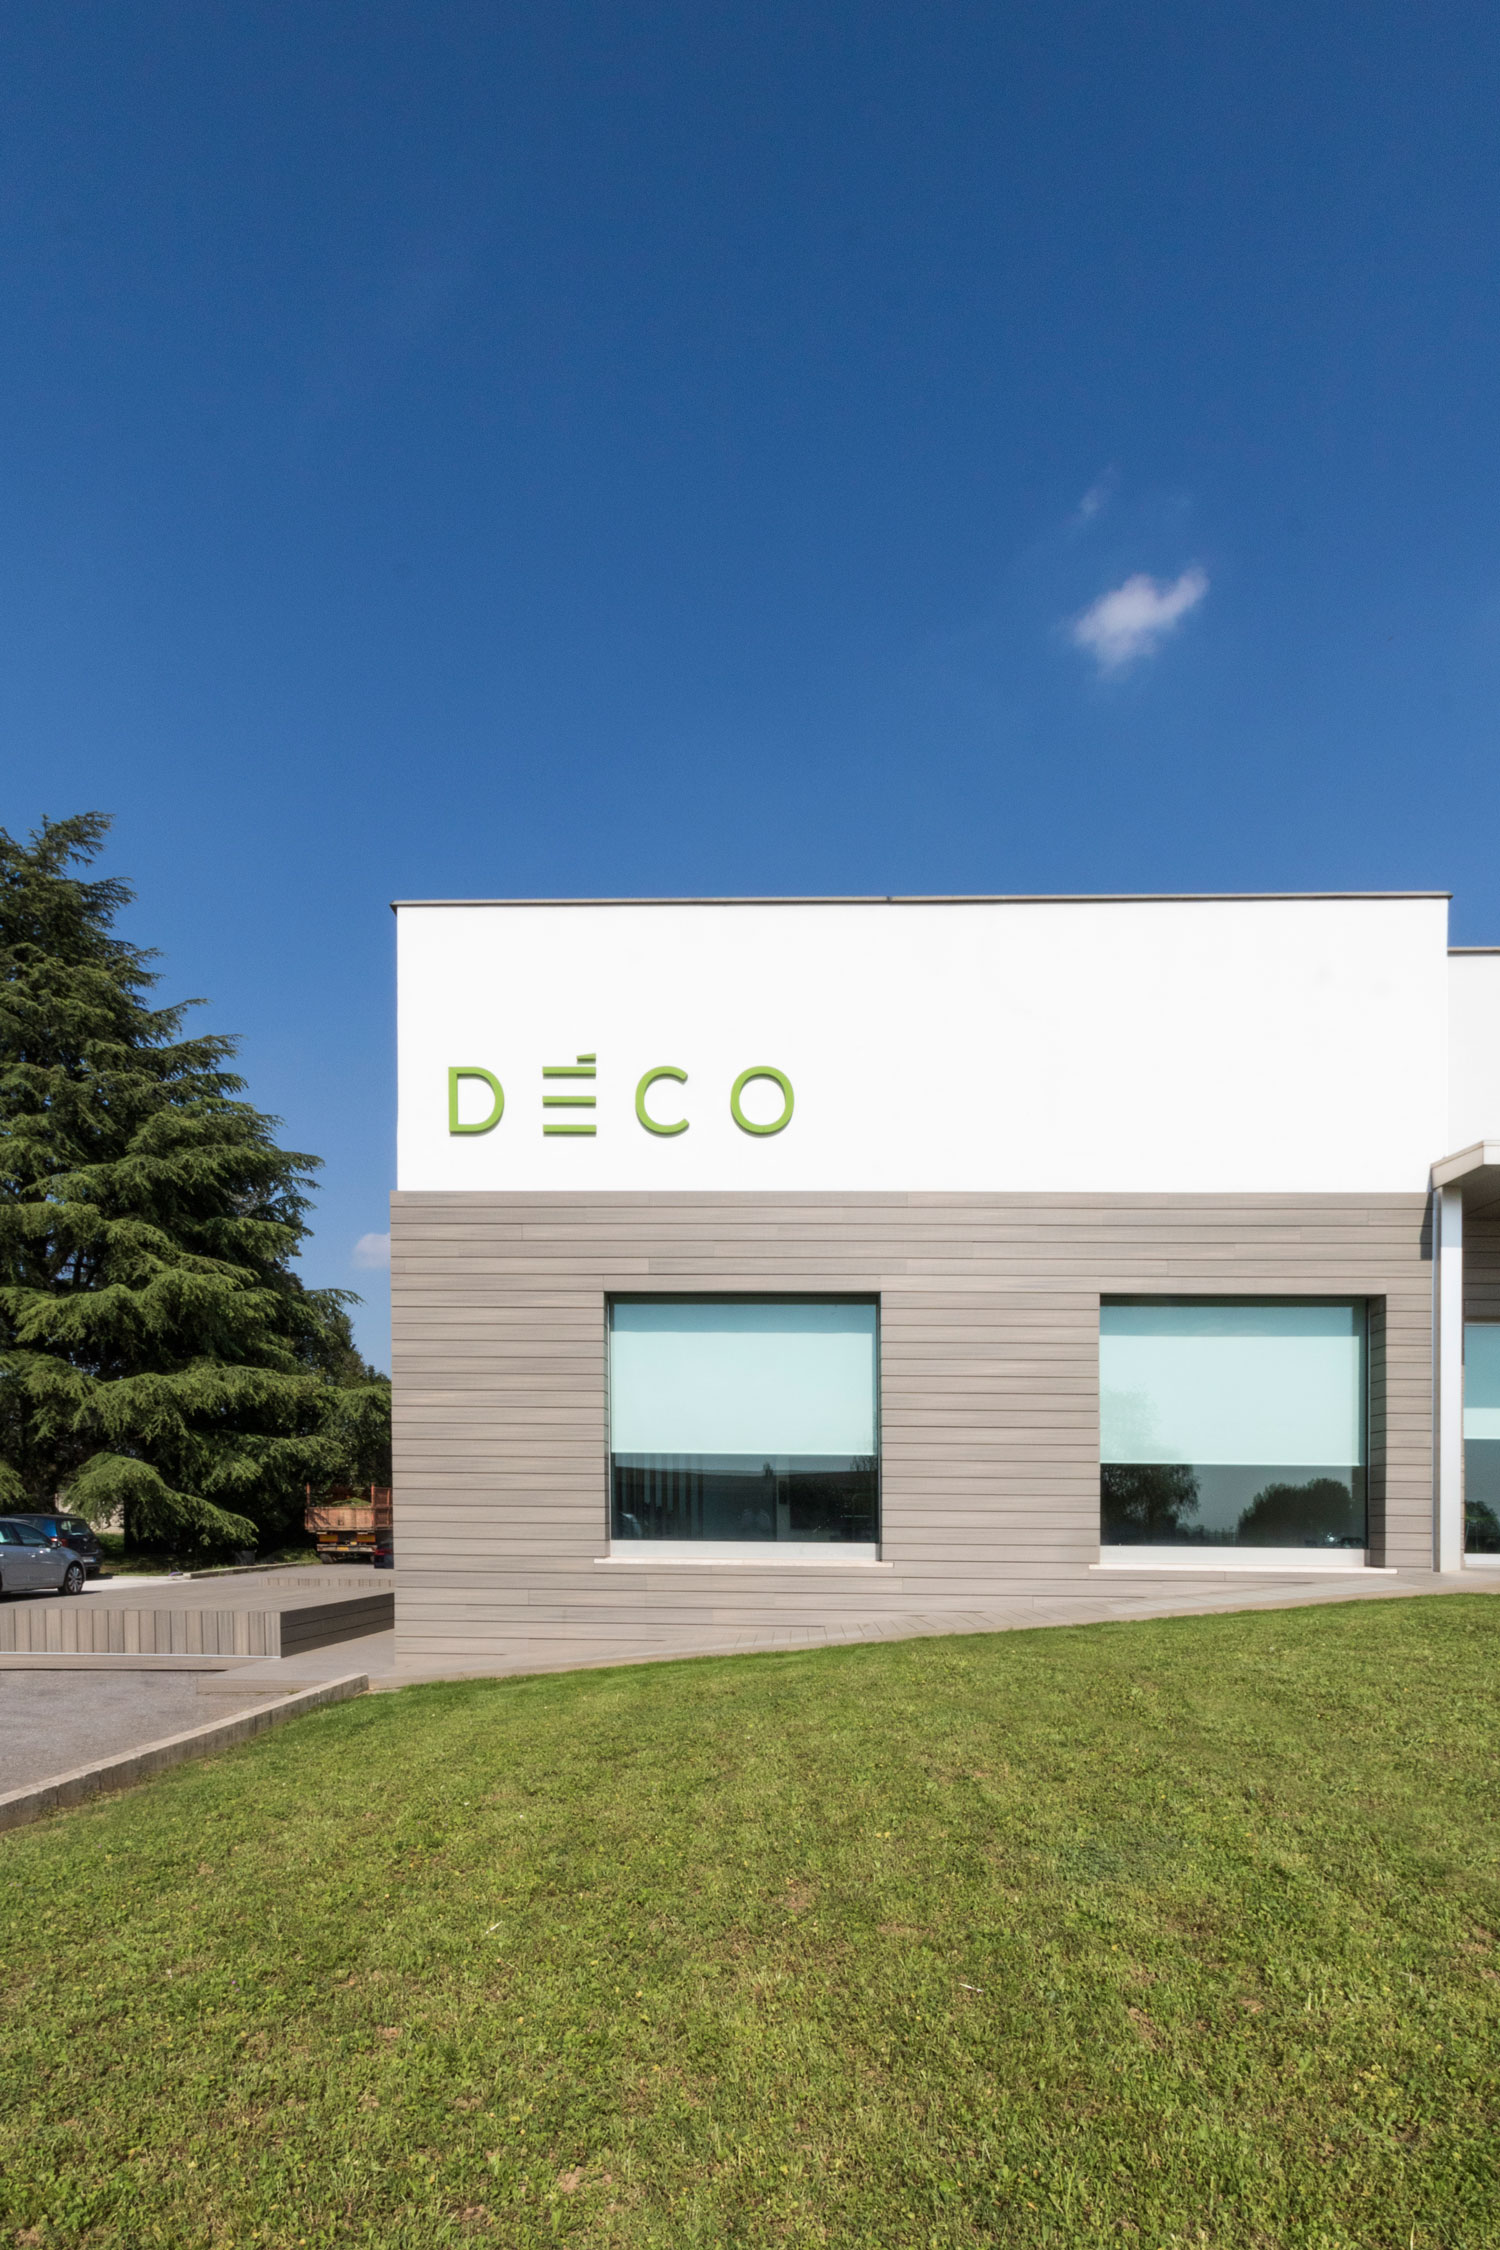 Deco design and external architecture